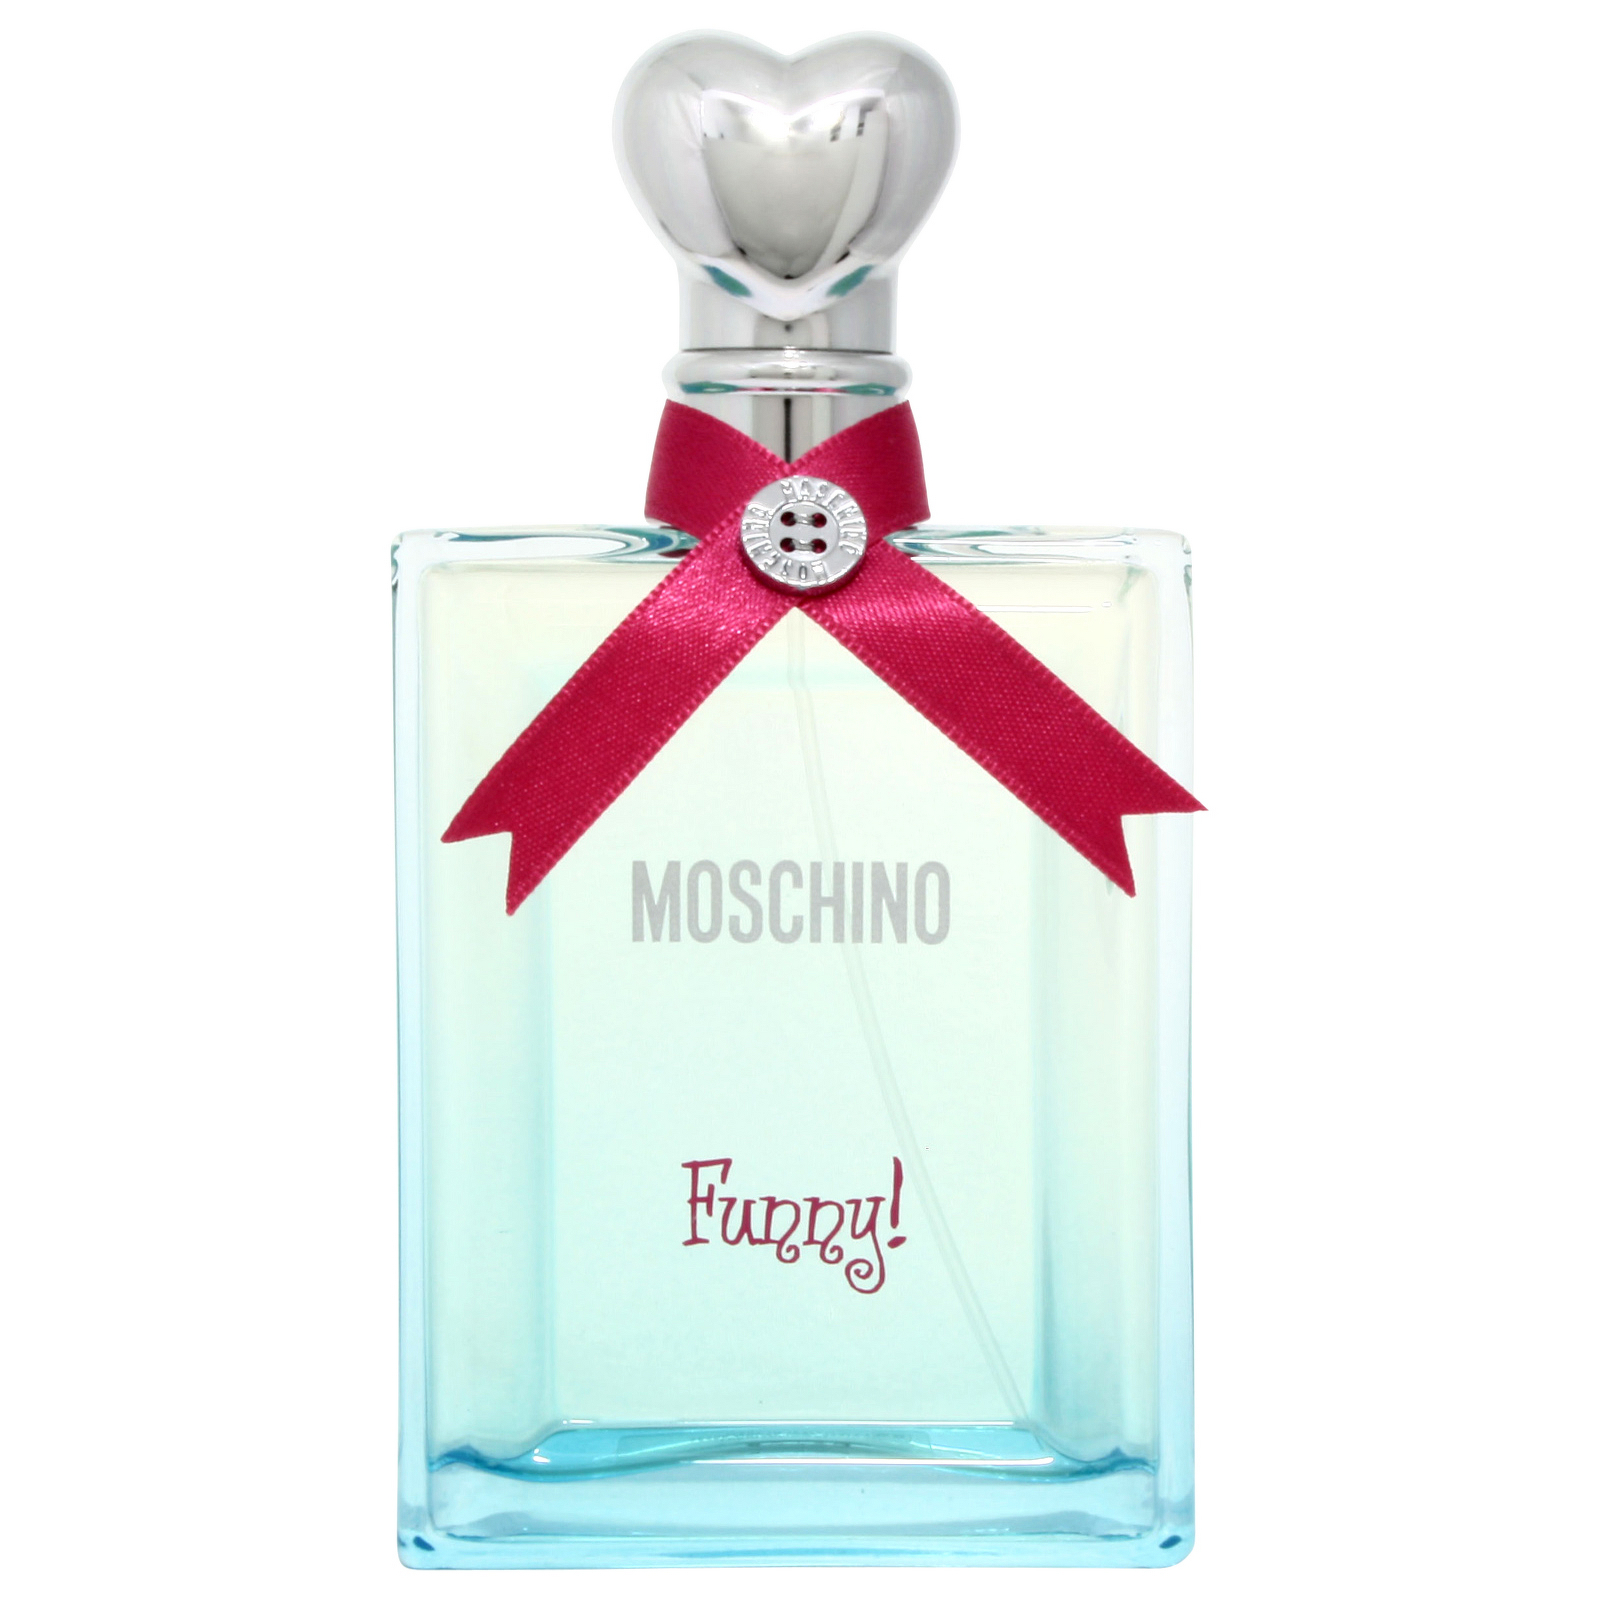 Moschino парфюмерная вода цена. Moschino funny for women EDT 100ml. Moschino funny! Lady Tester 100ml EDT. Moschino funny w EDT 100 ml. Moschino Parfum funny Eau de Toilette.